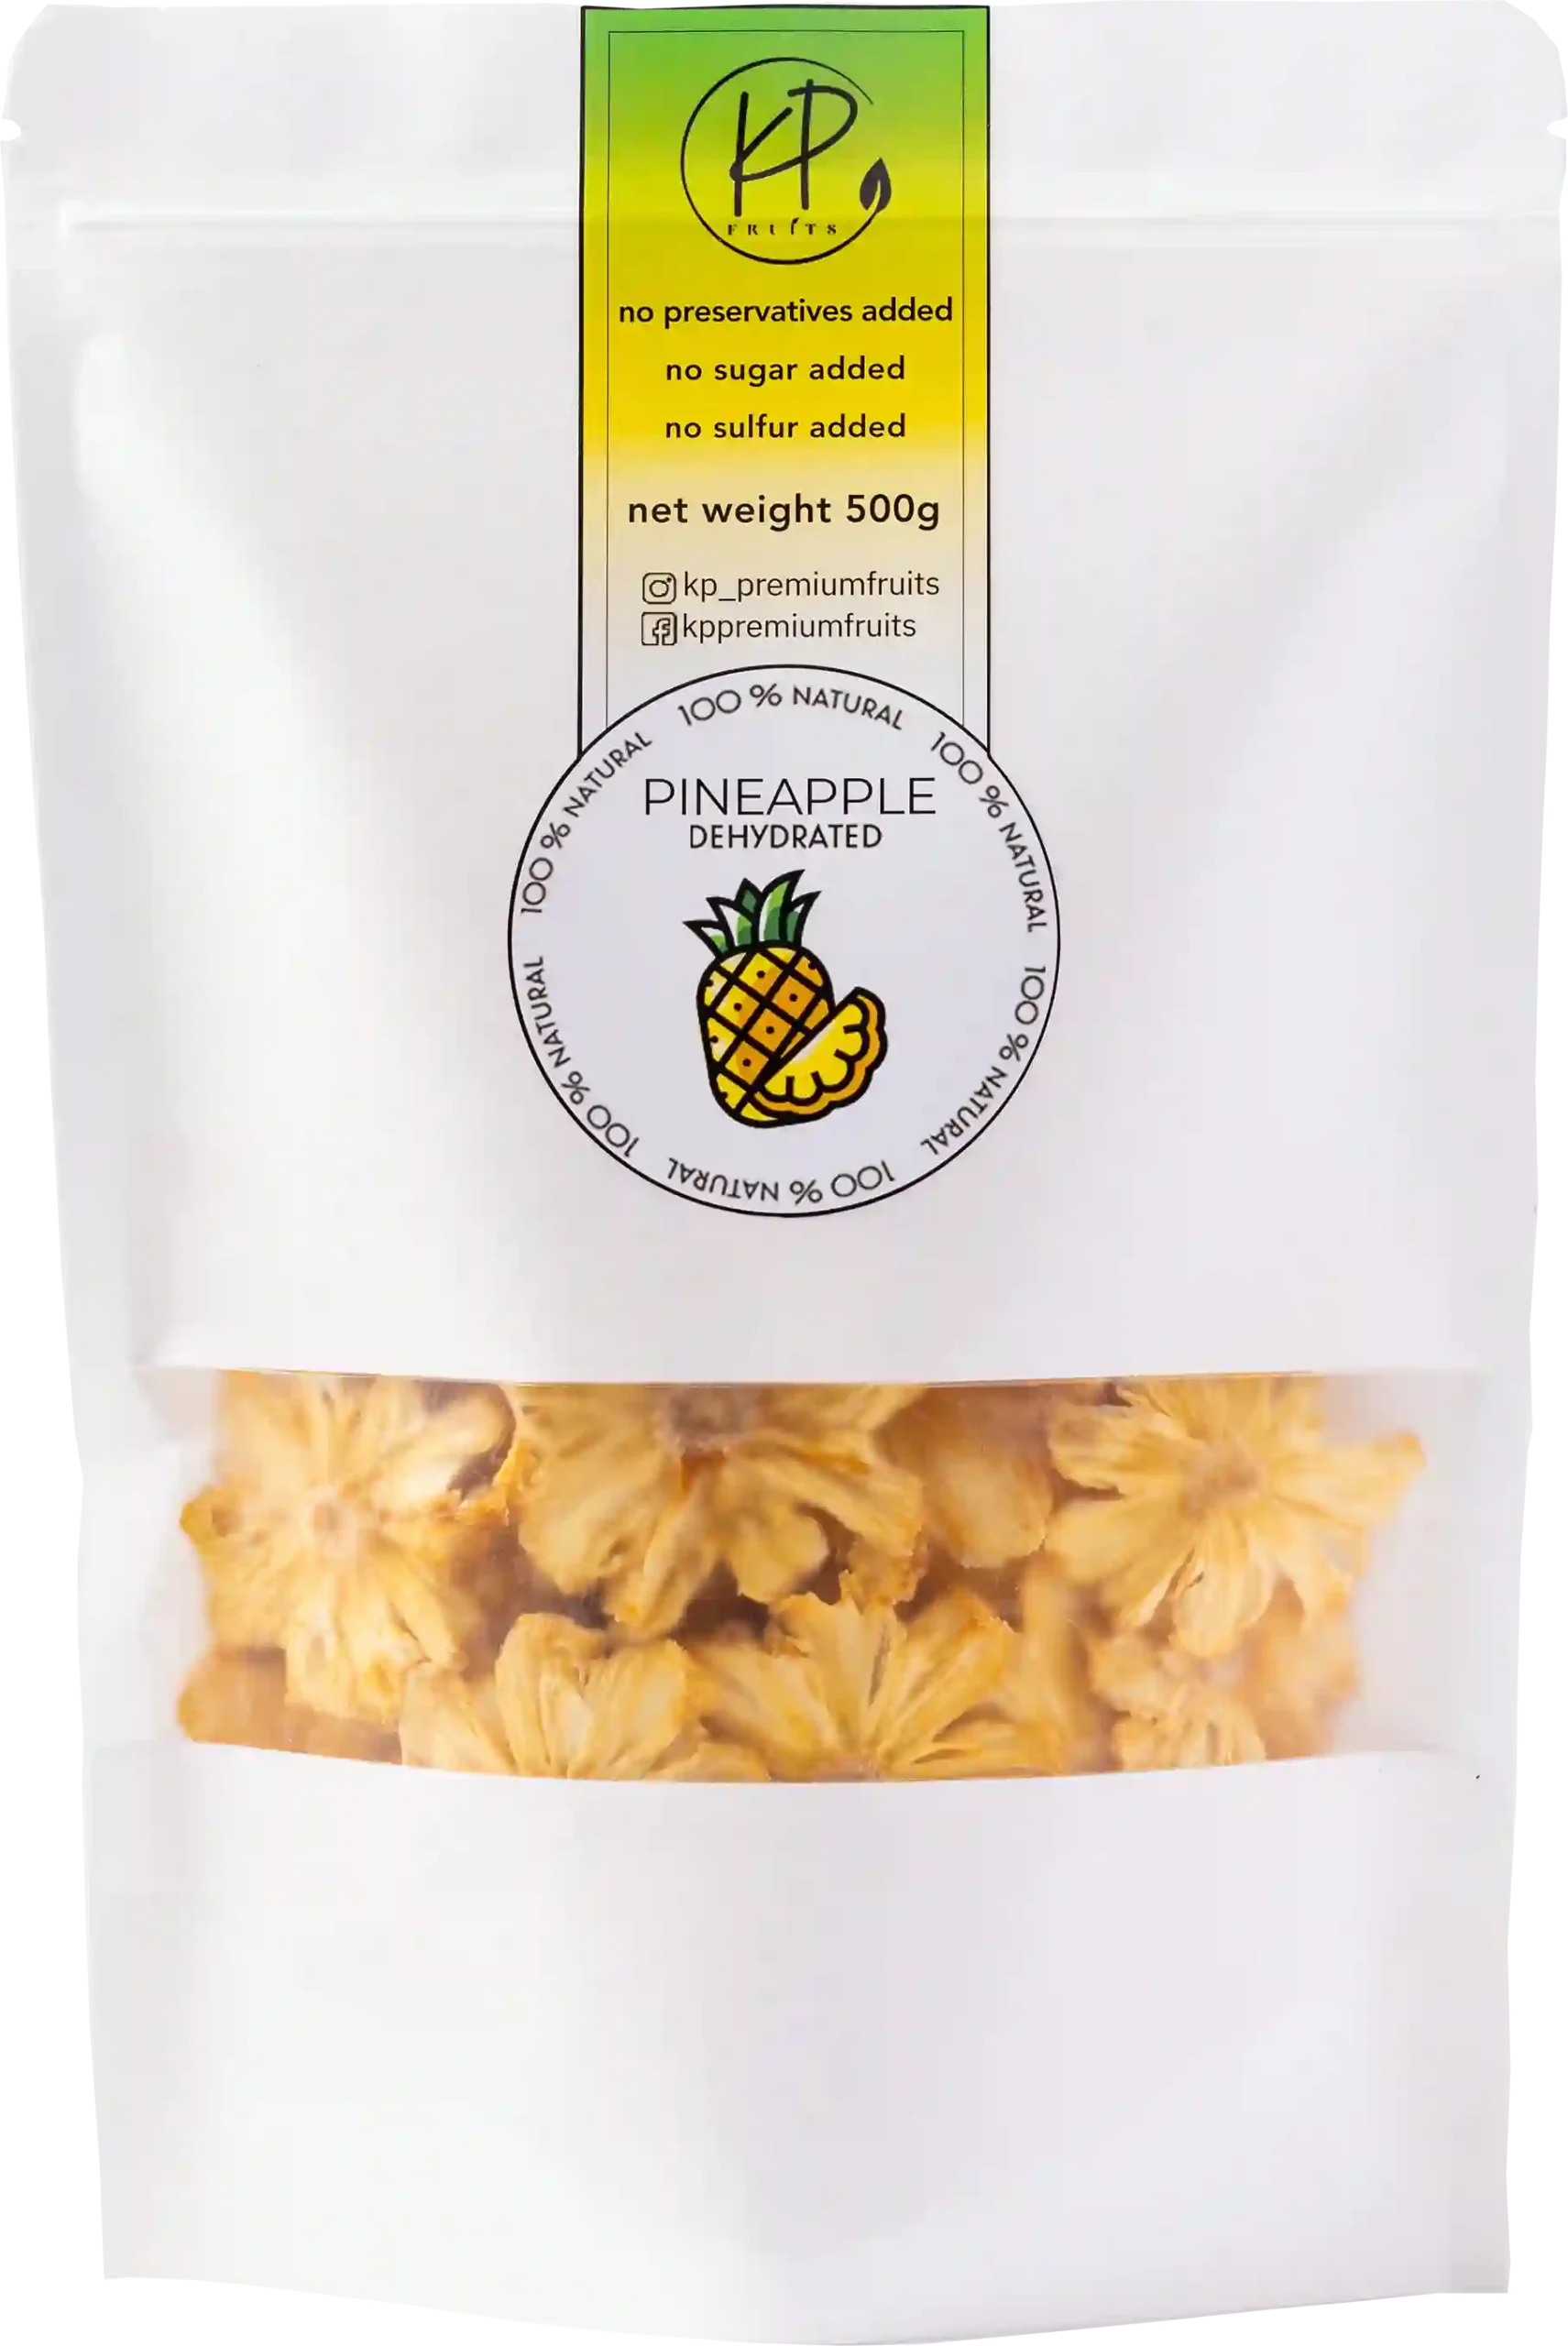 Try our dried pineapple as a snack or as part of a delicious dessert with no sugar and additives added